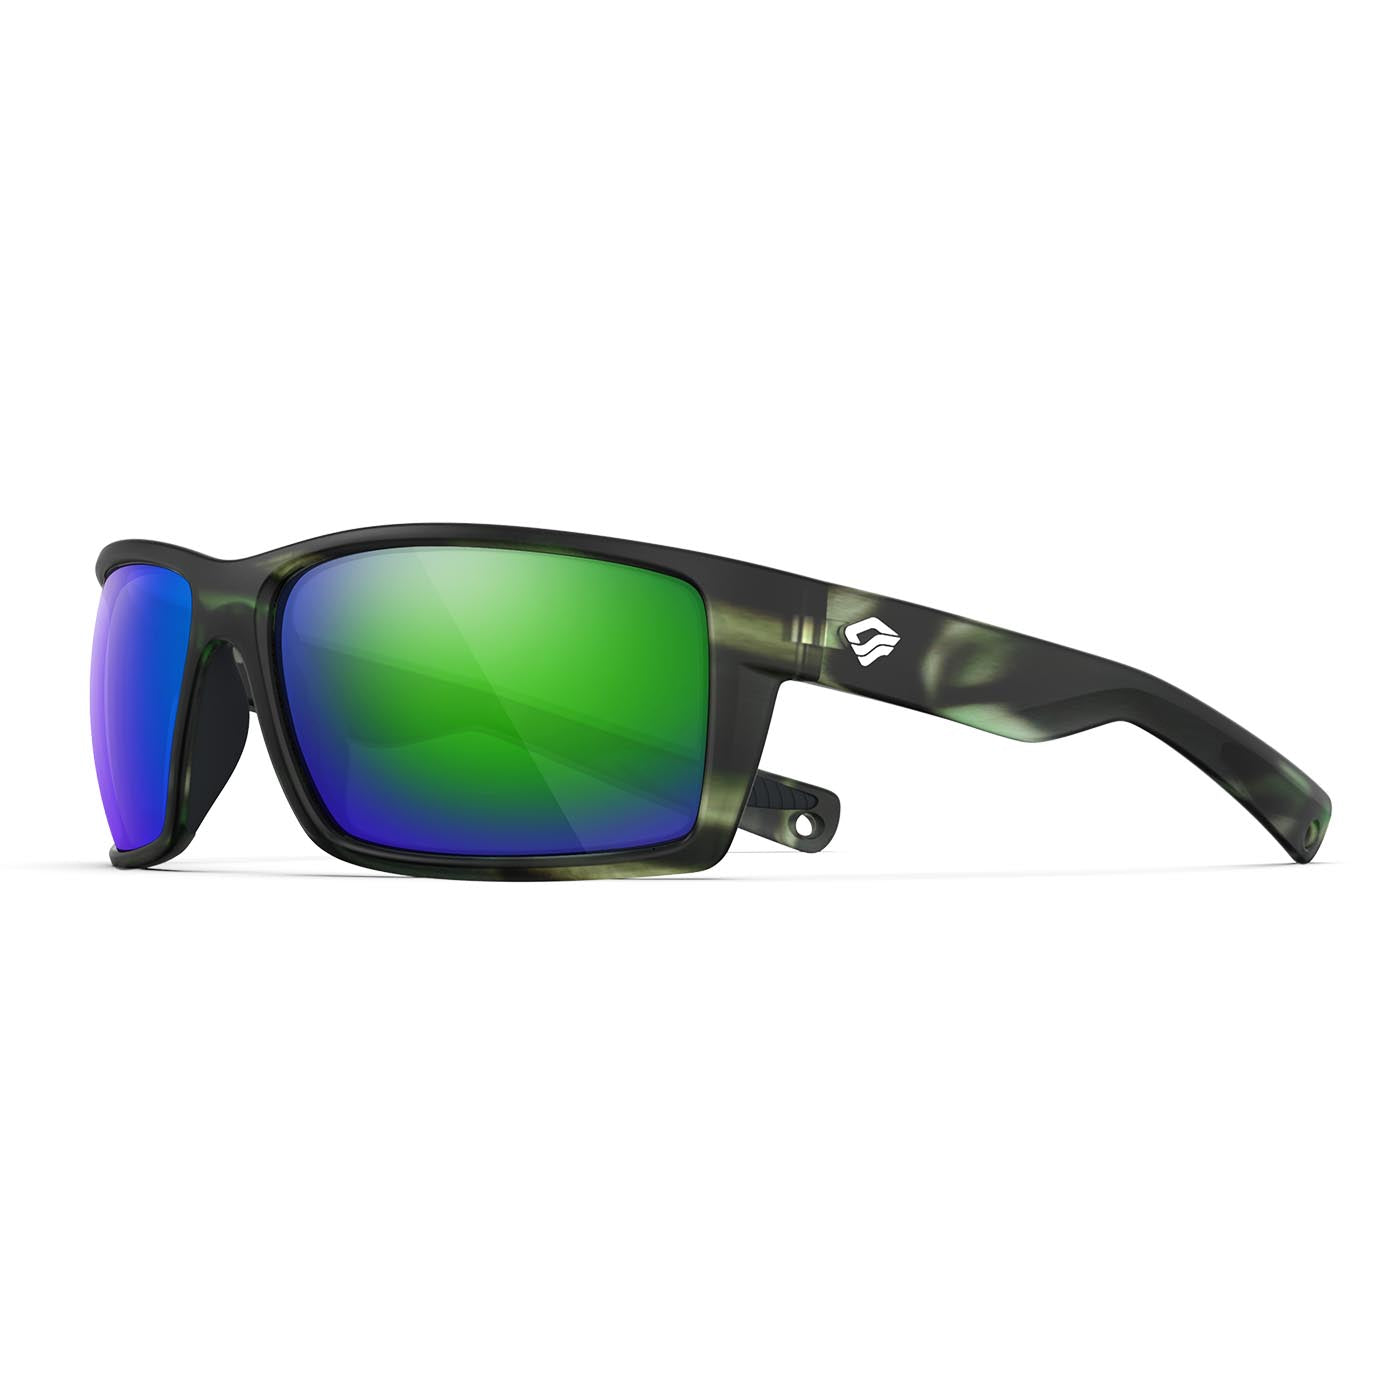 Lagoon Jade Polarized Sports Sunglasses for Men and Women With